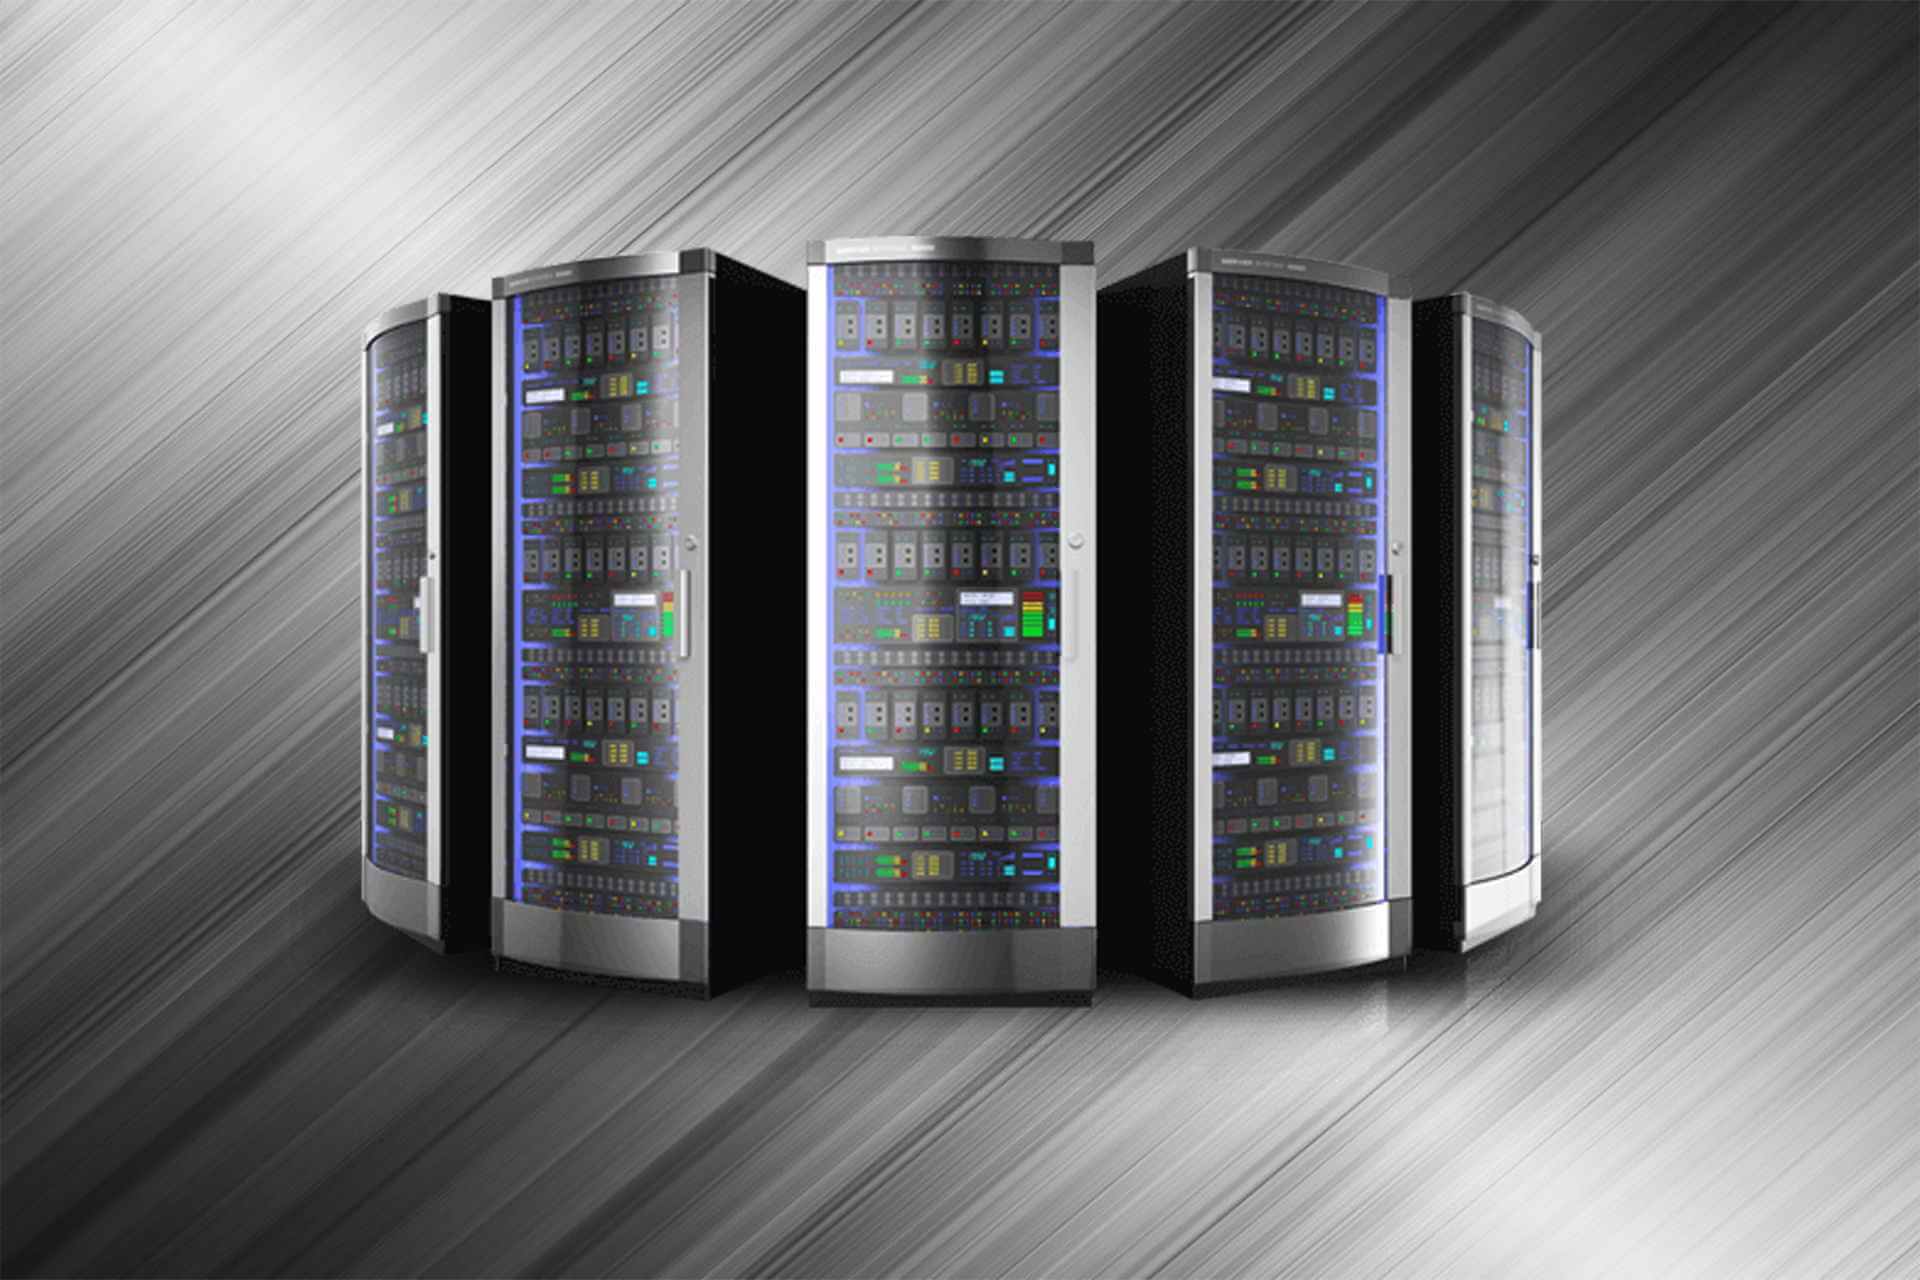 Backup software tools for servers